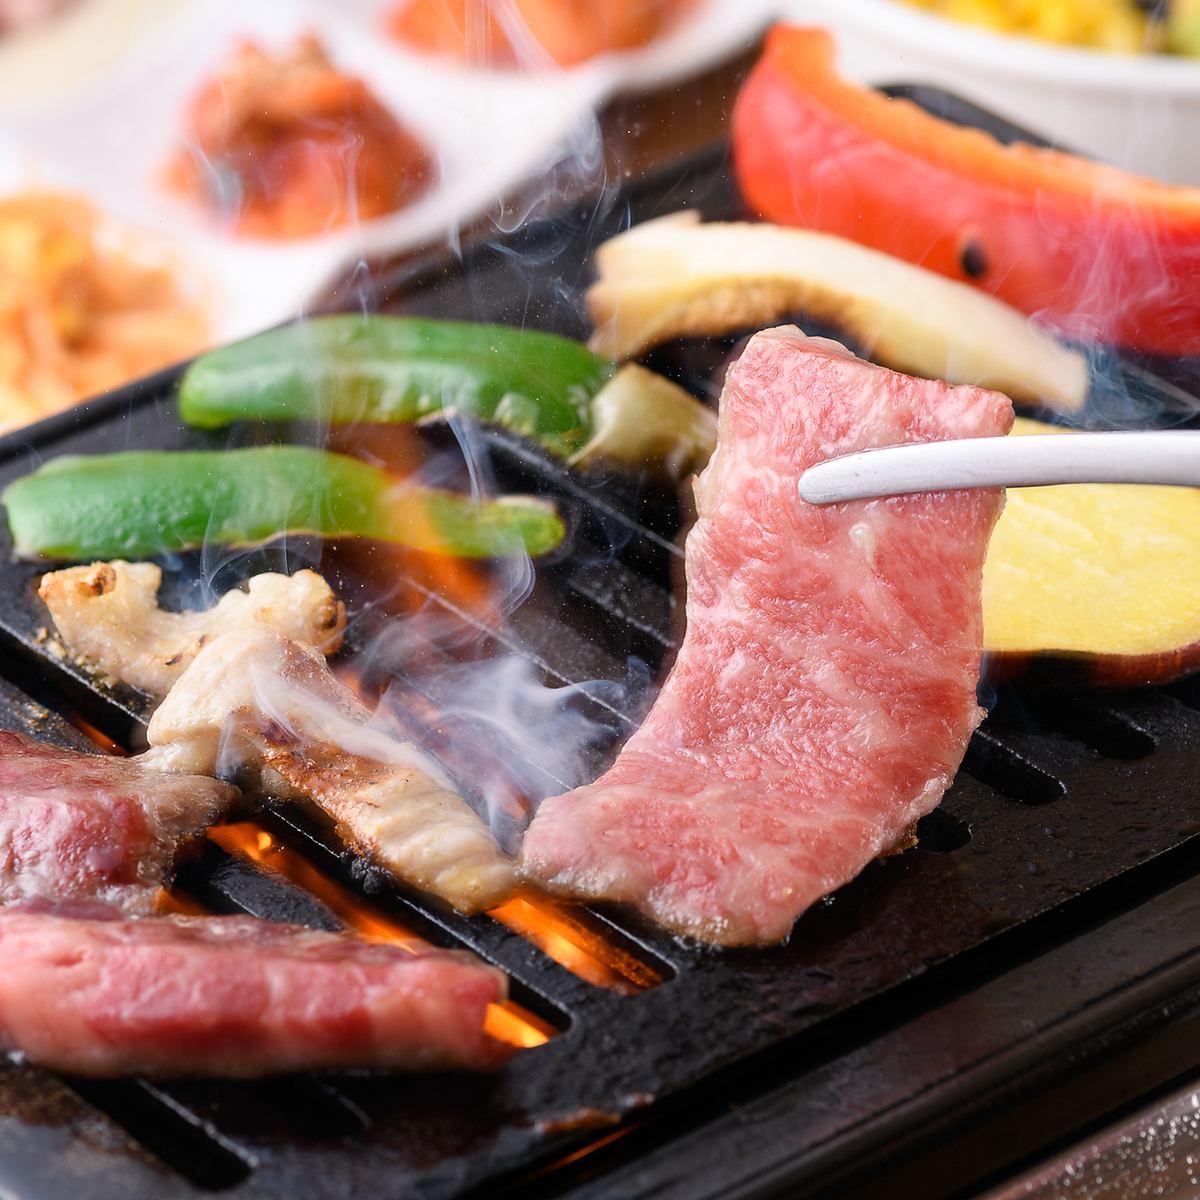 A yakiniku restaurant where you can fully enjoy high-quality meat at a reasonable price in a private space